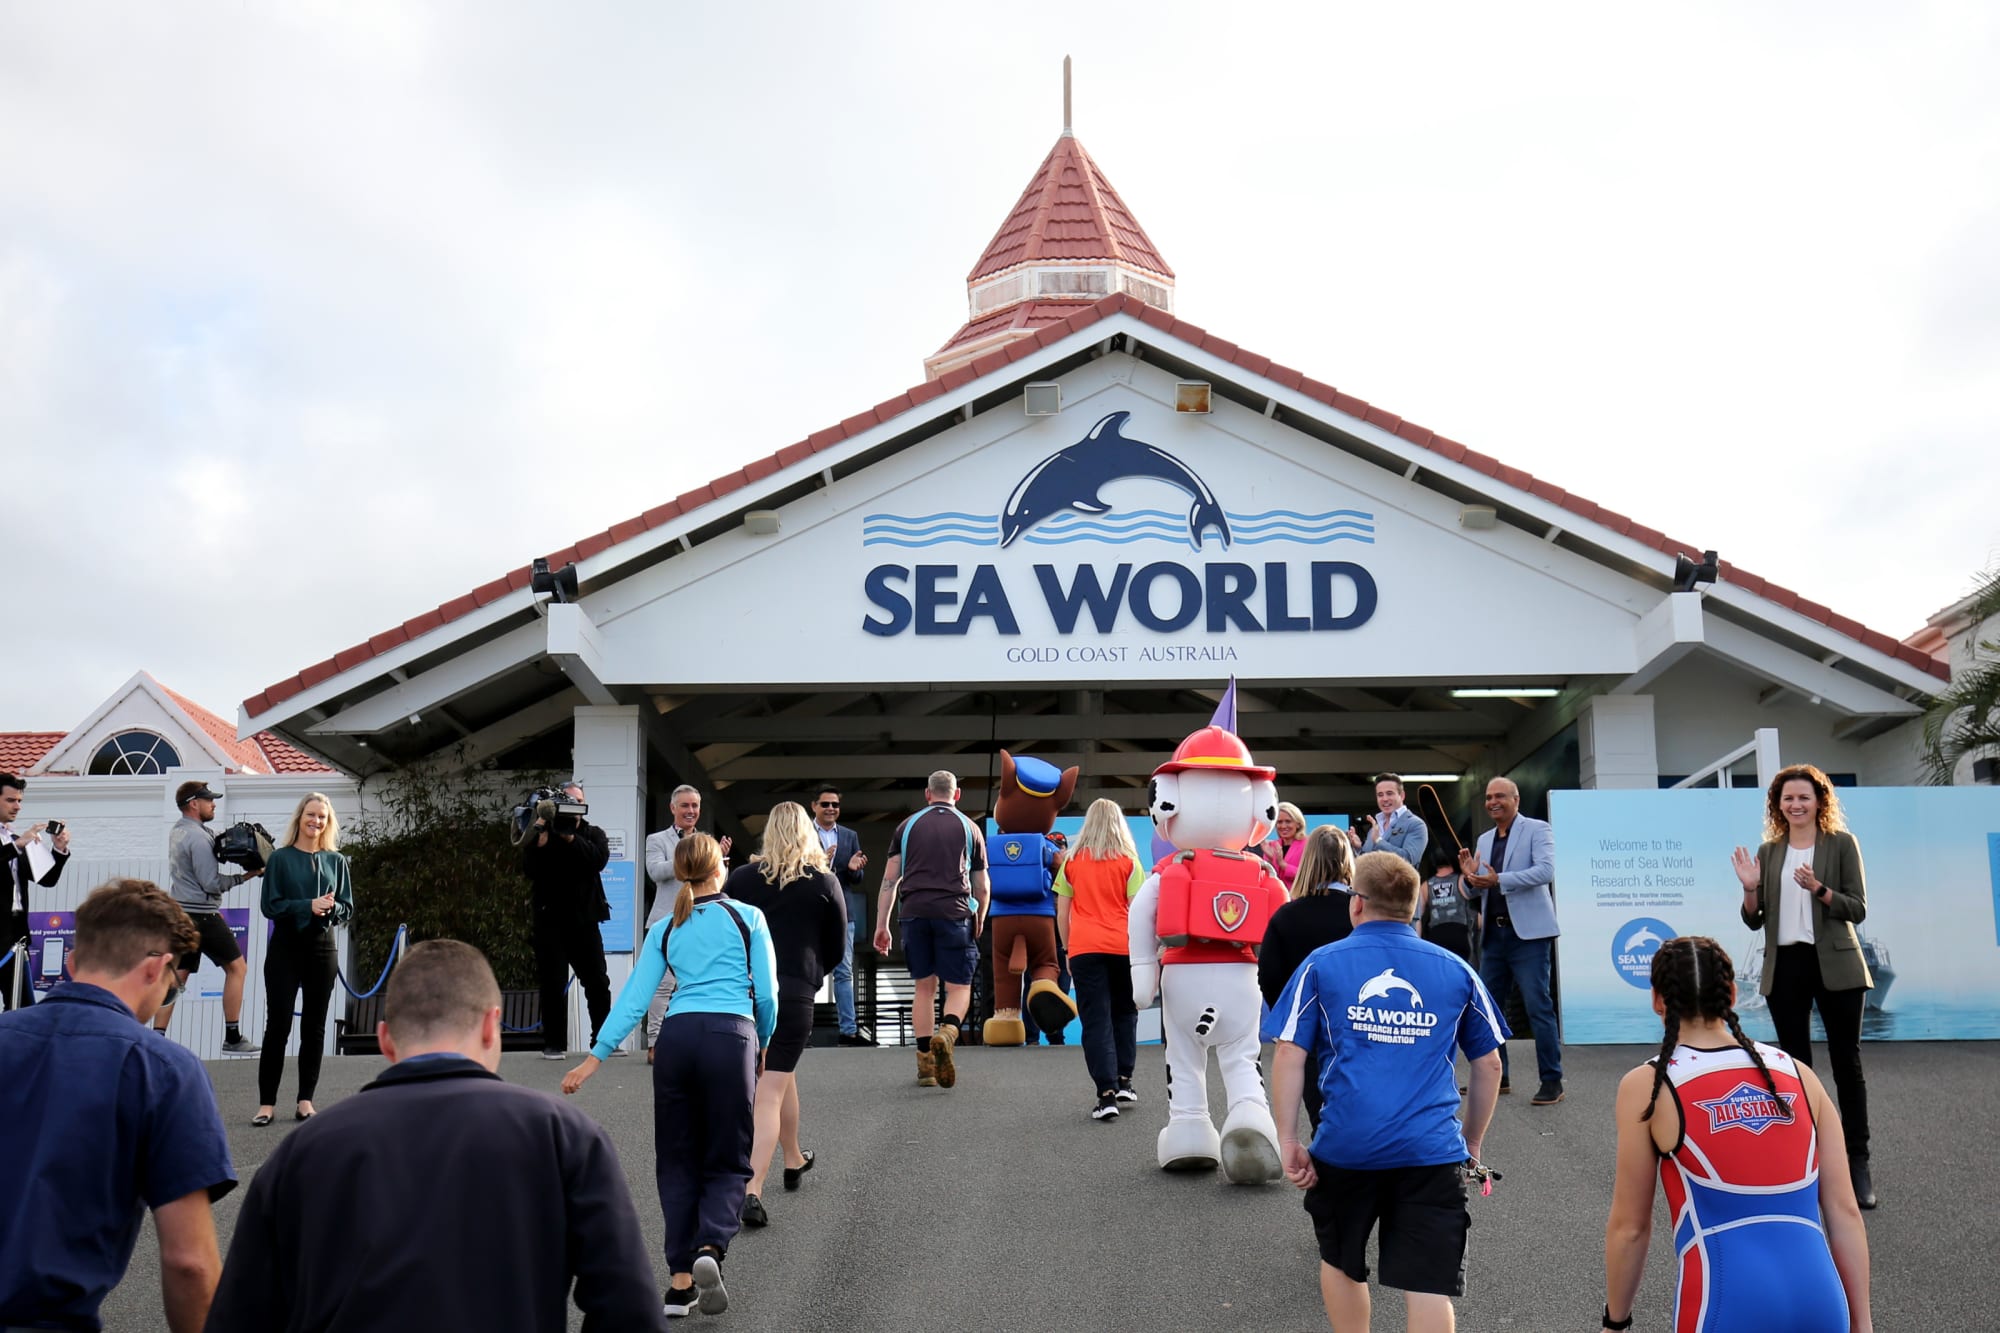 SeaWorld Black Friday deals arrive early and they rock!